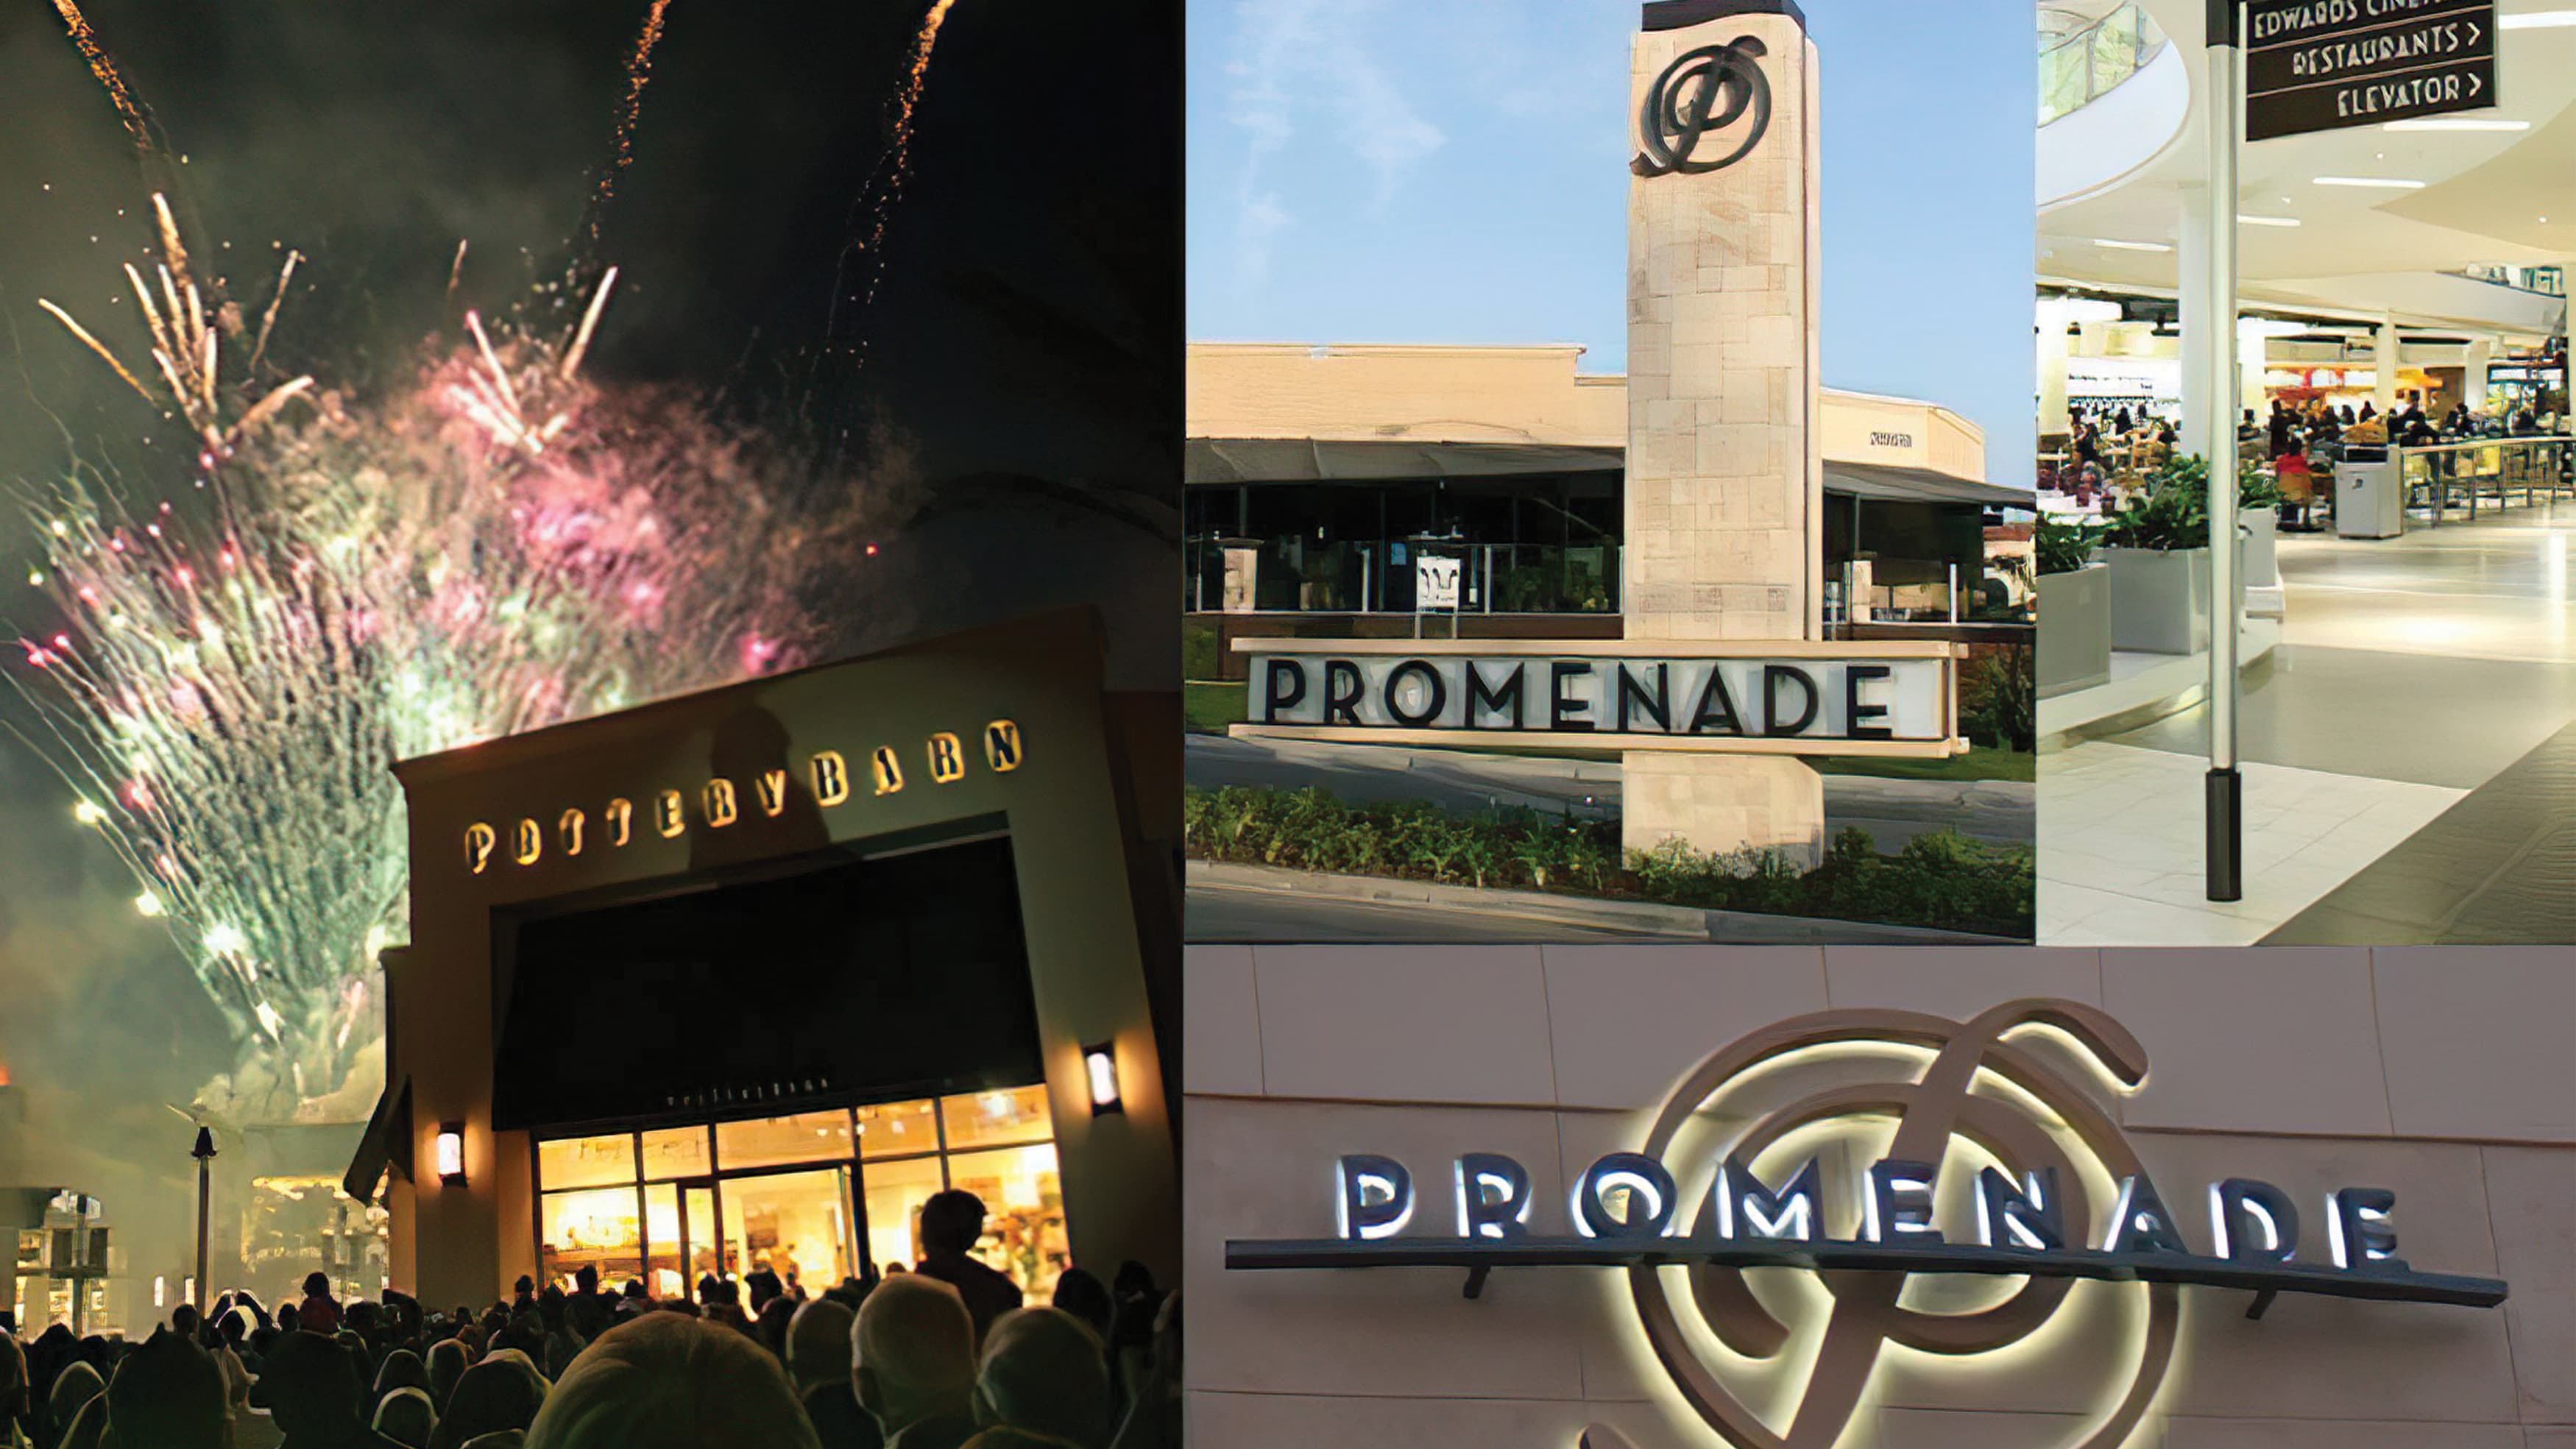 Fireworks, bands, and local wineries were part of the gala event and festivities at the grand re-opening of the Promenade Temecula renovation and expansion